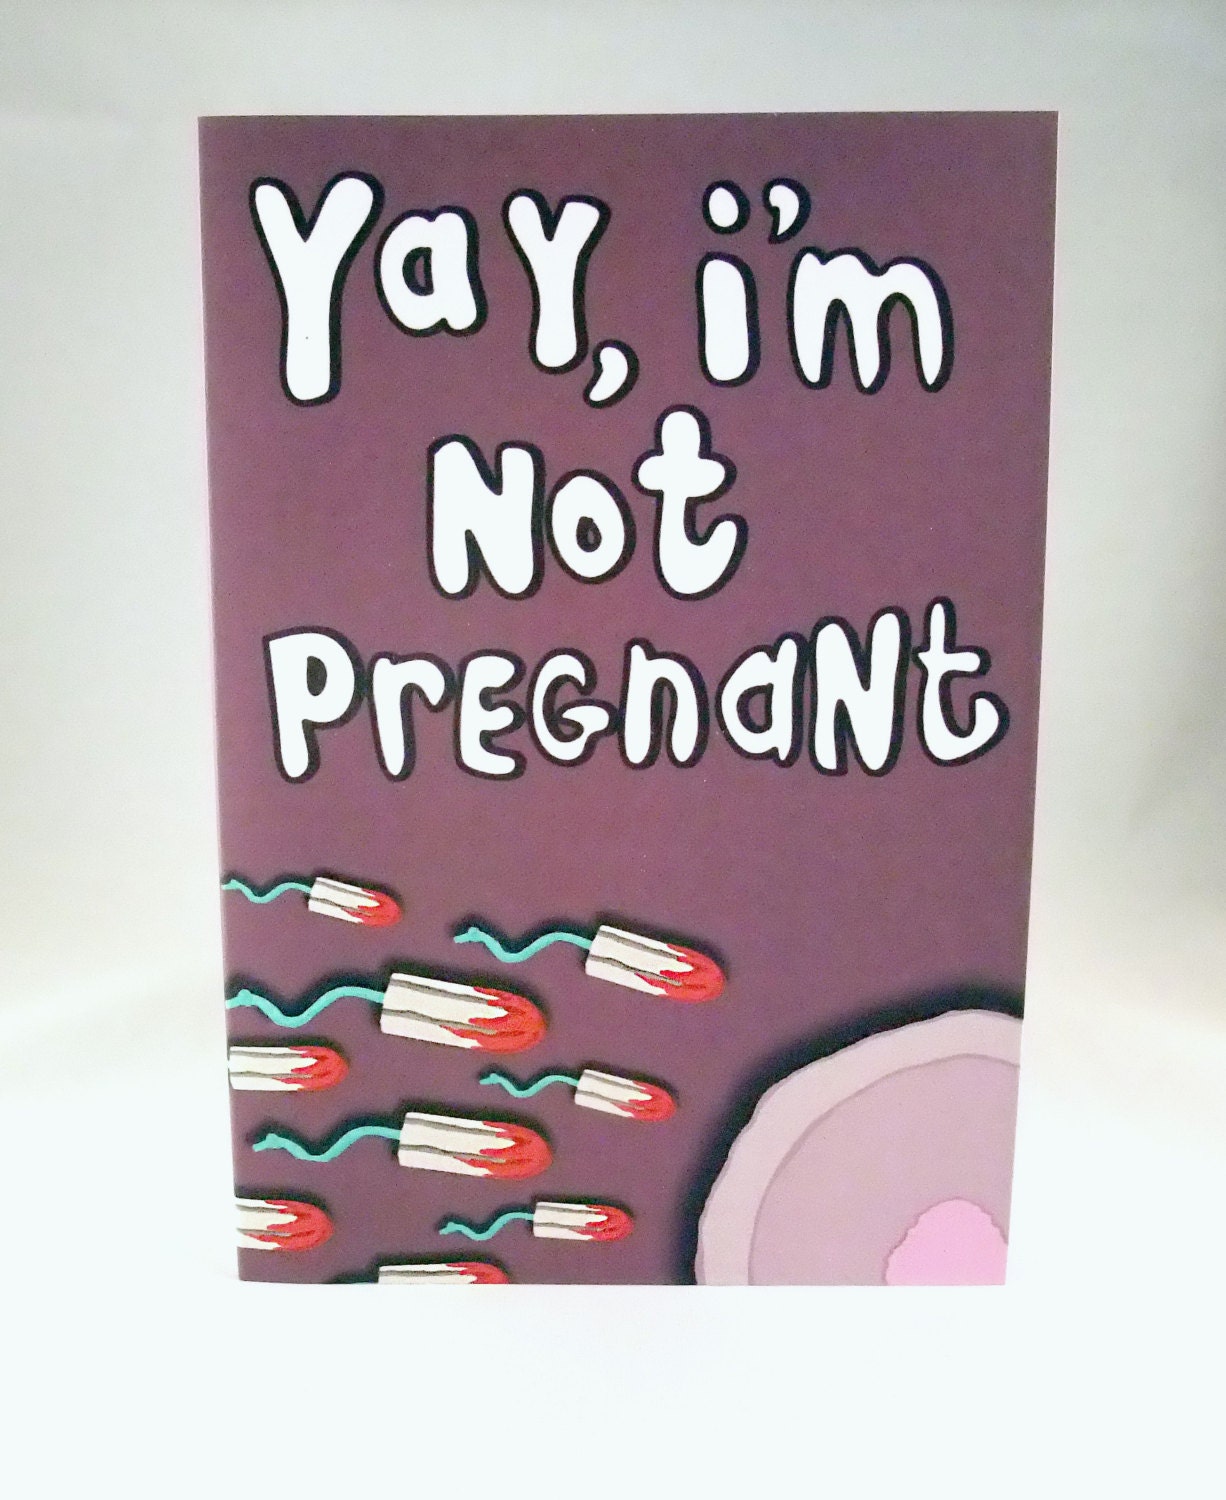 one night stand pregnant